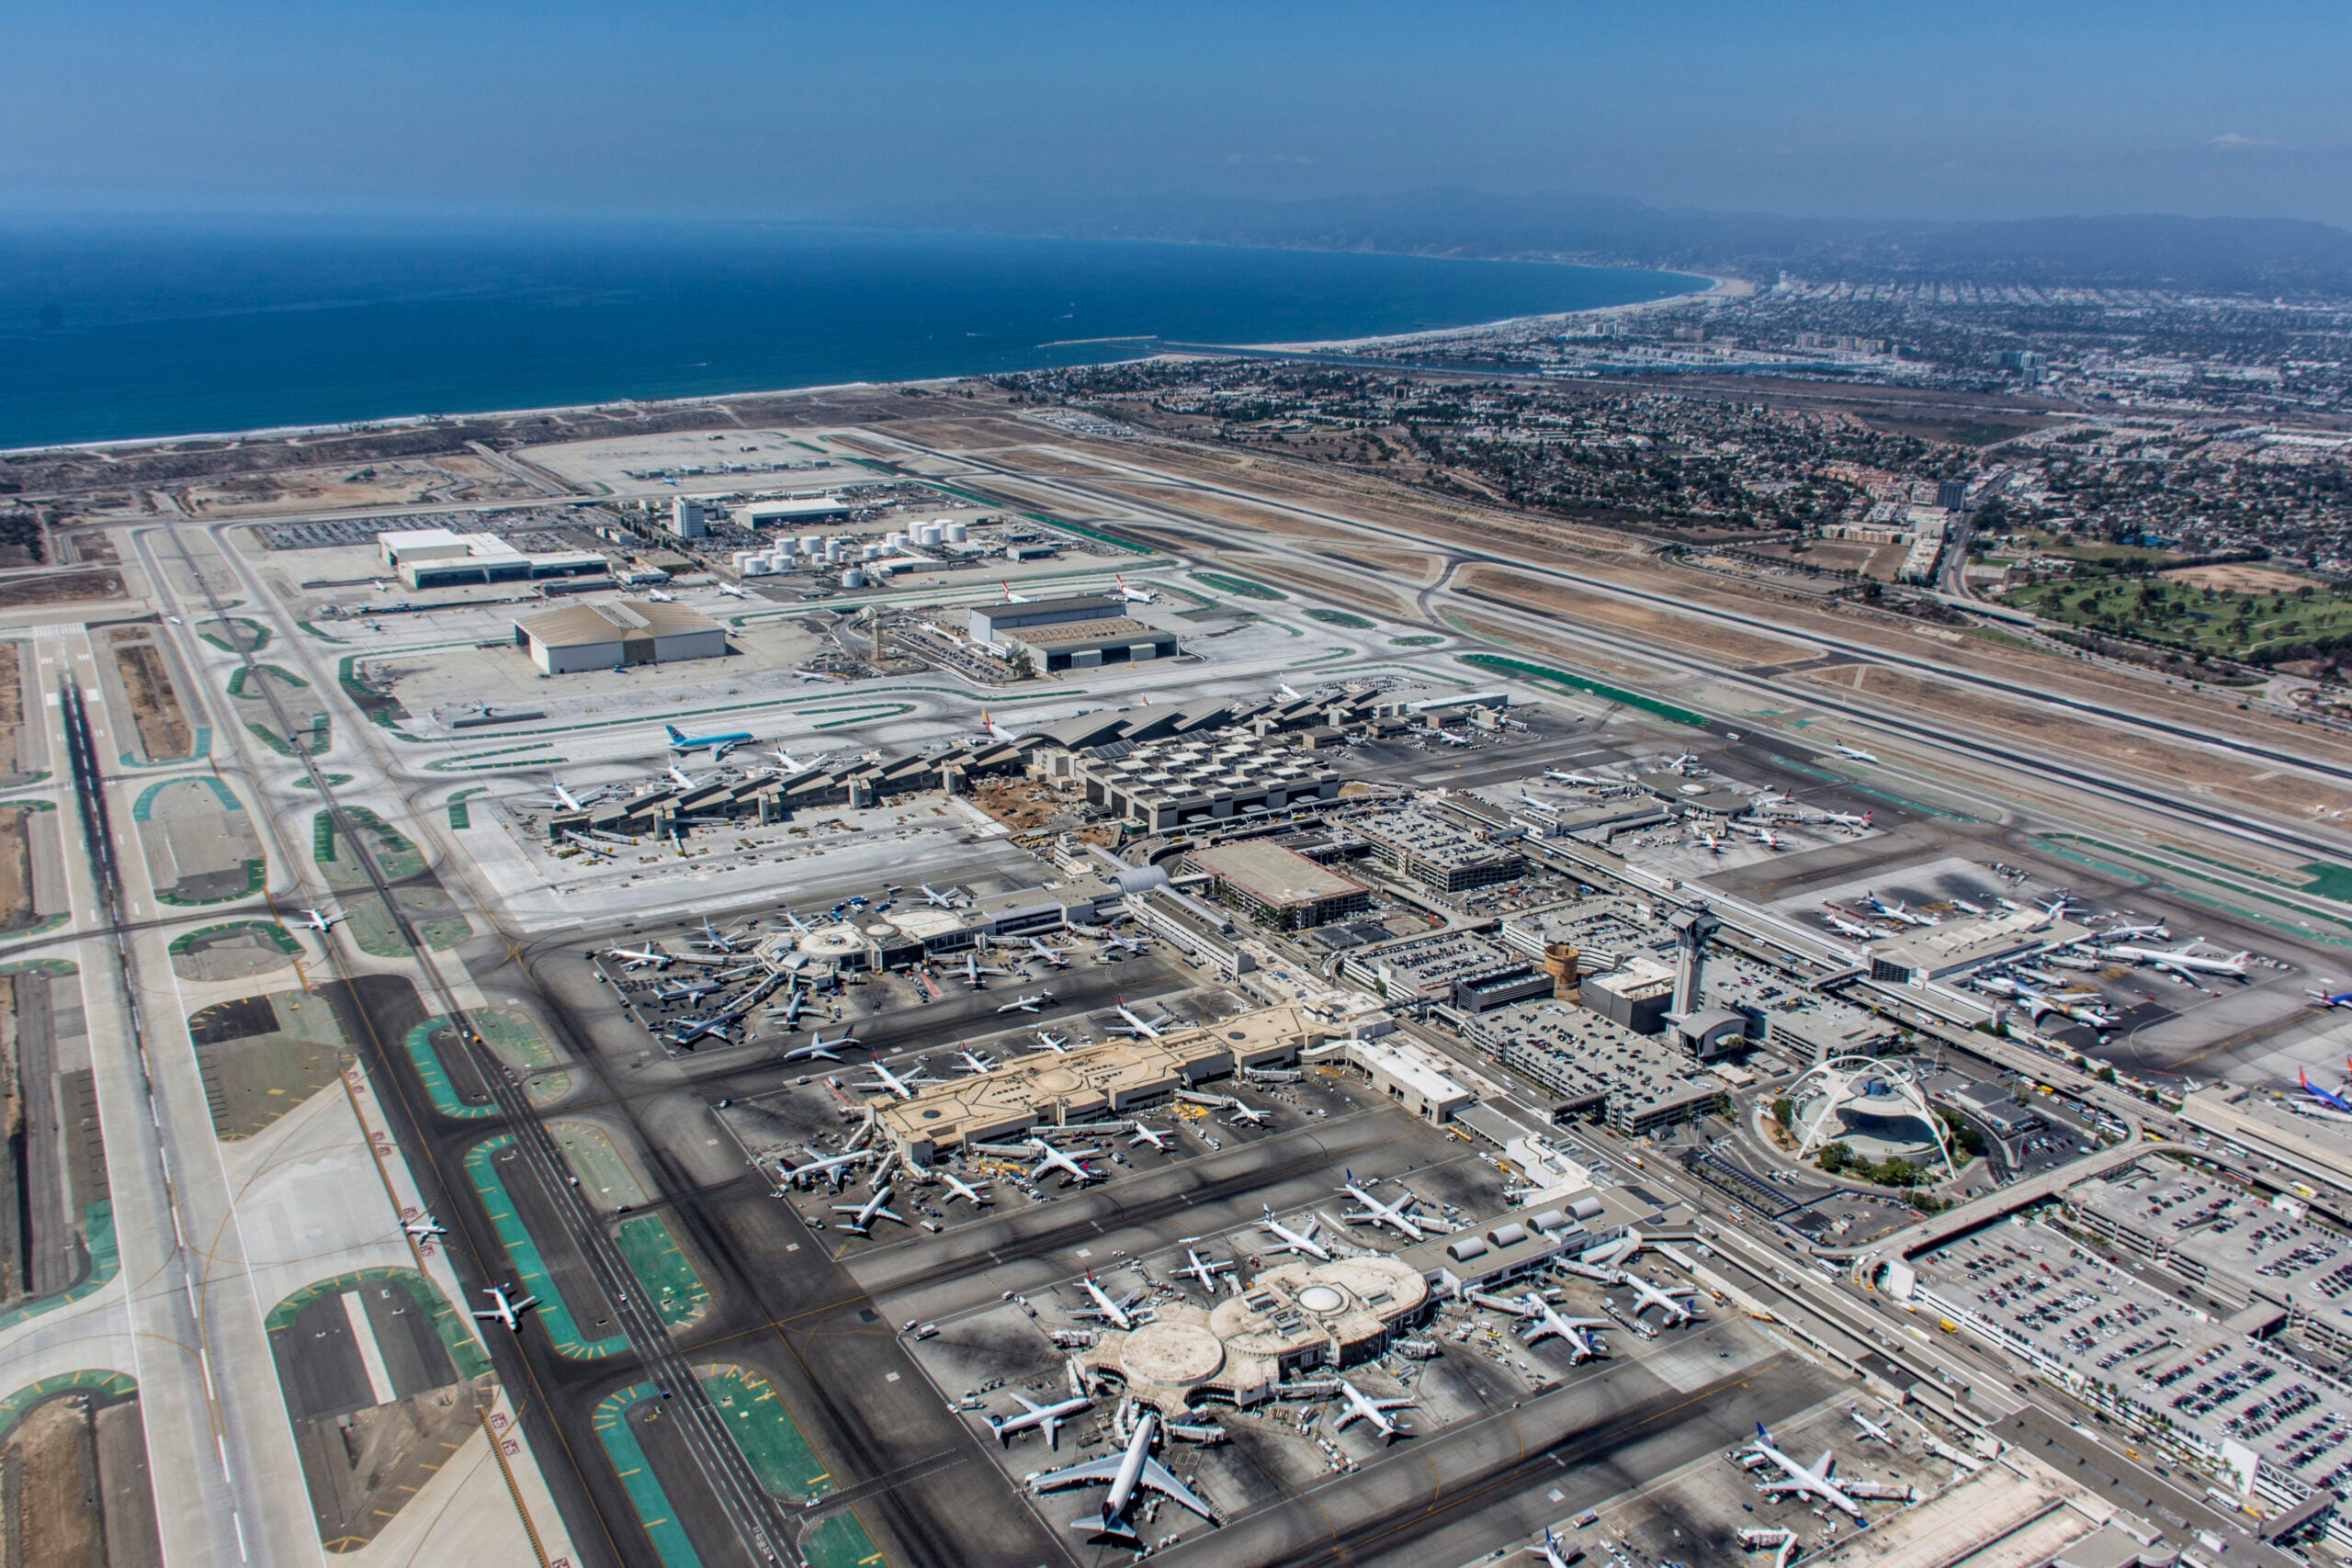 LAX turns into 2nd main US airport to ban sale of single-use plastic water bottles